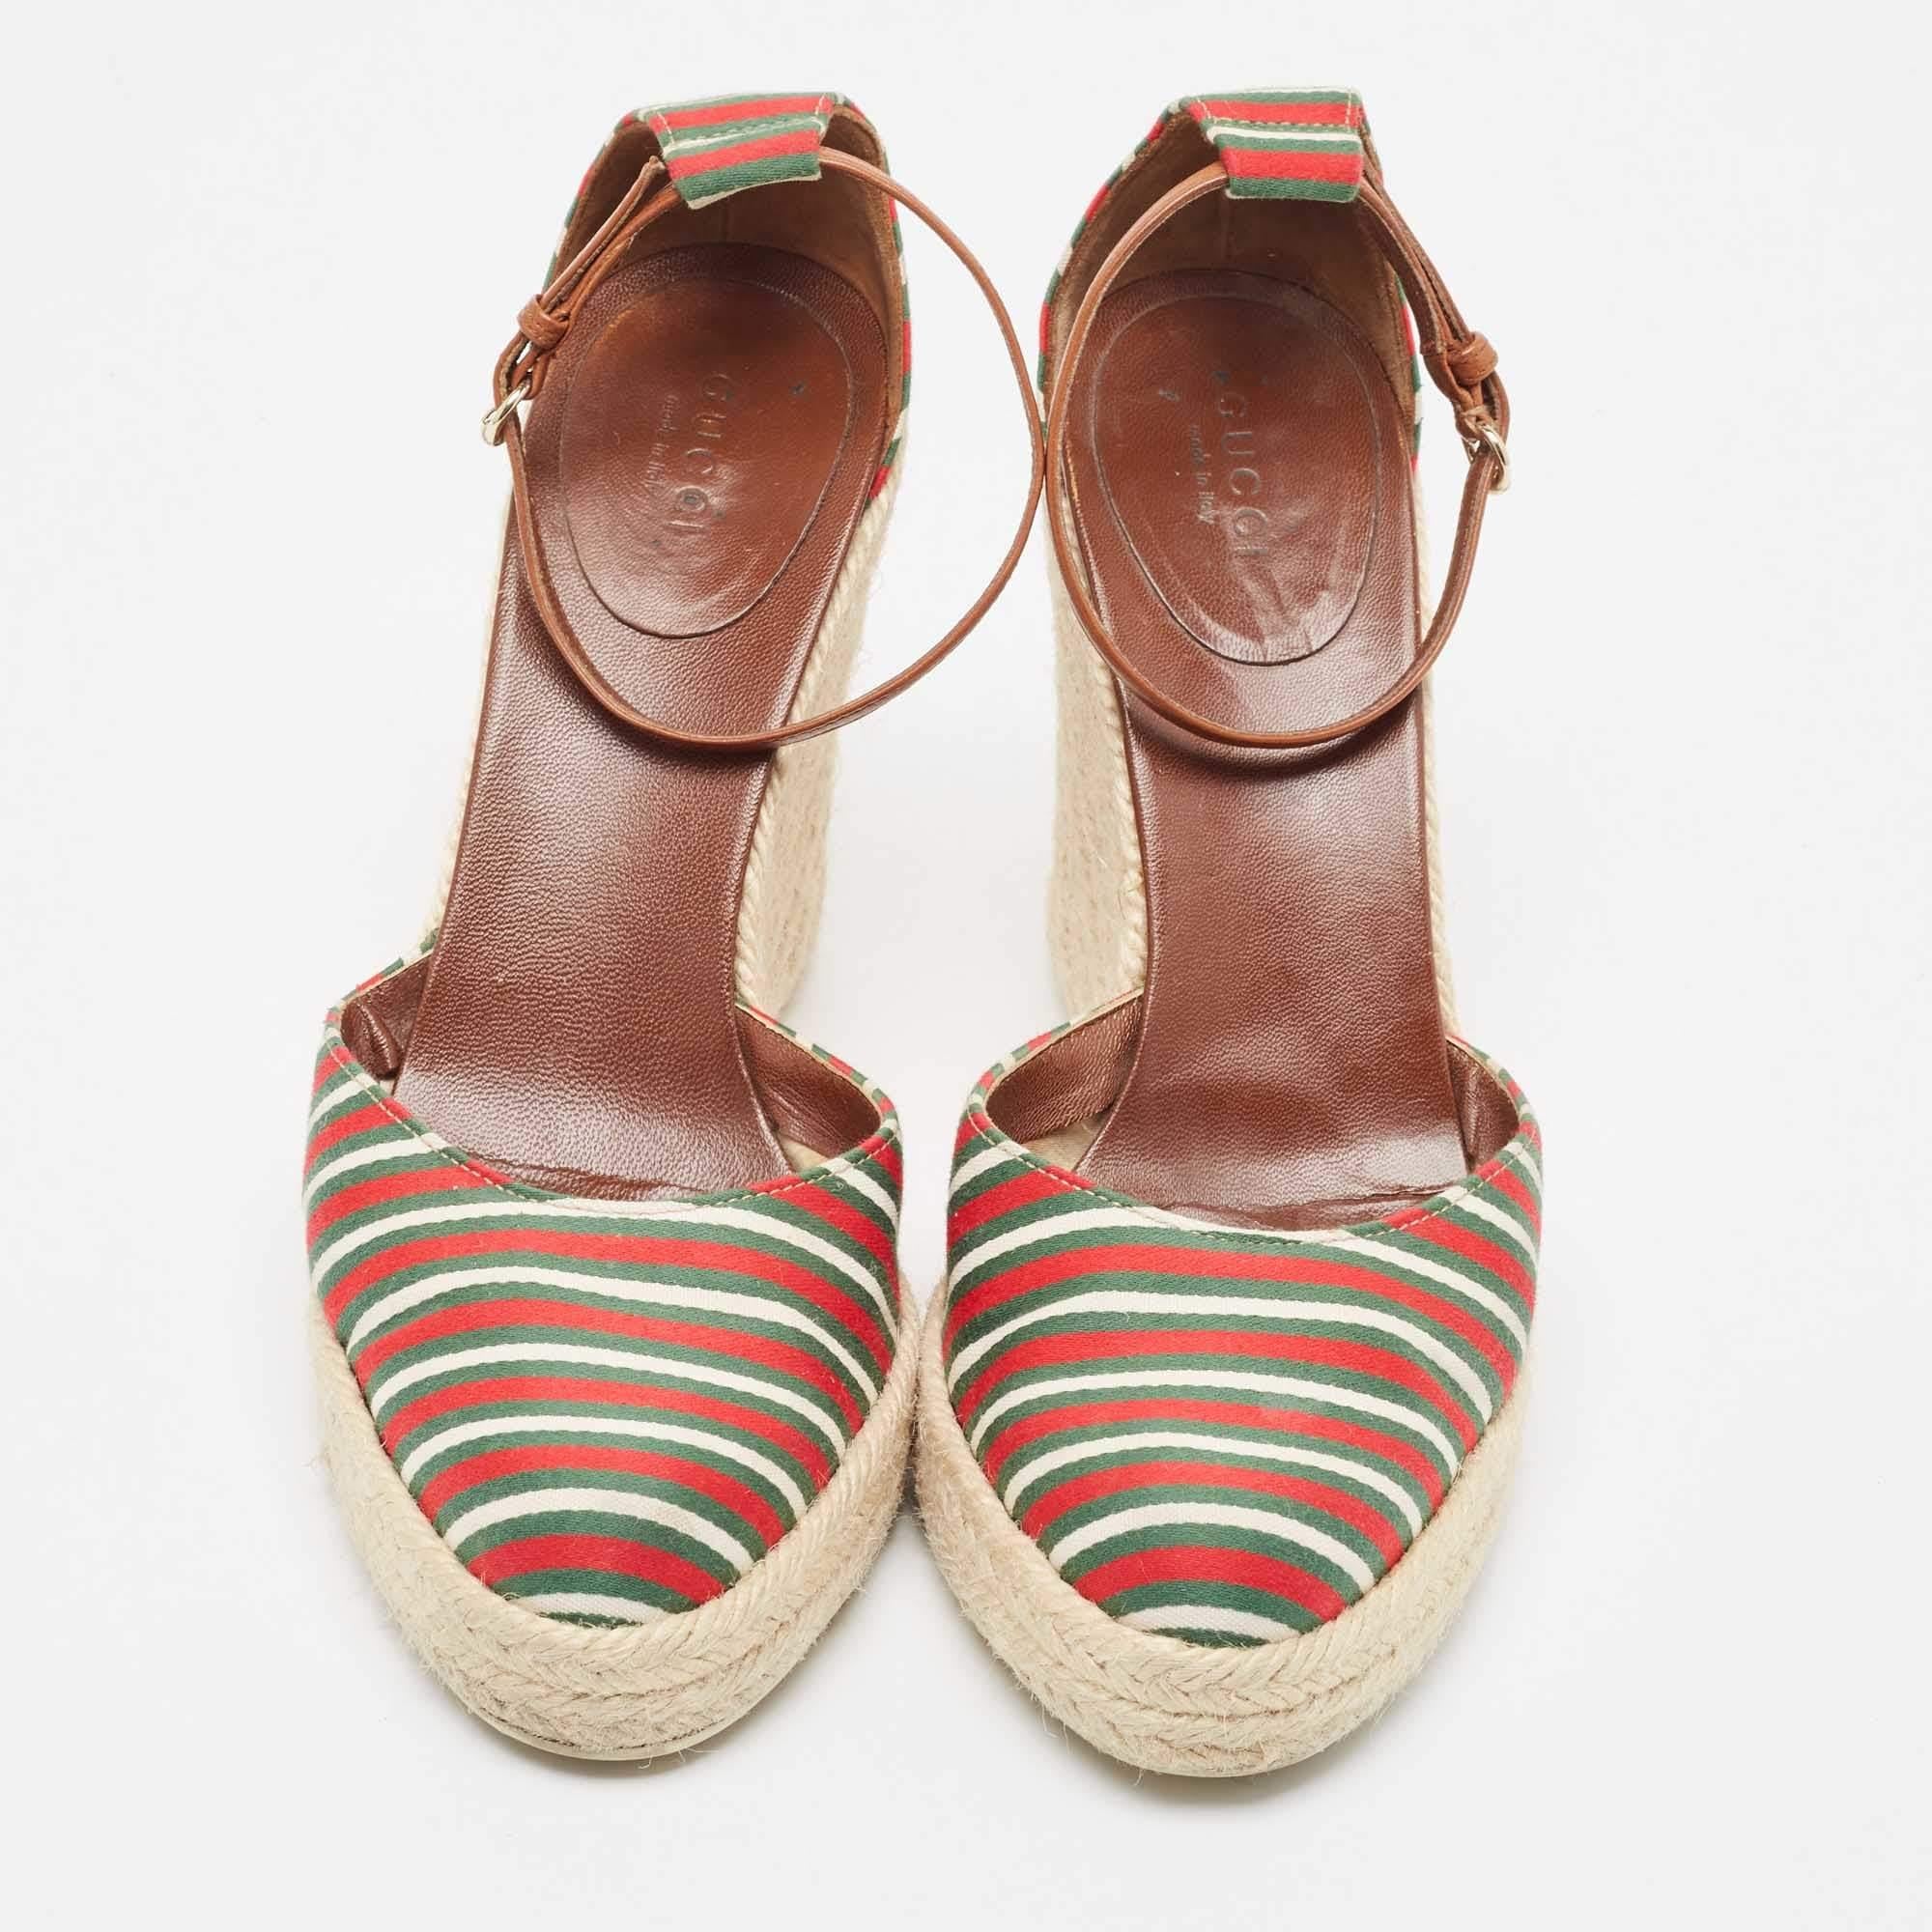 This pair of sandals by Gucci delivers sophistication. The shoes come made from fabric in classy shades and are designed with covered toes, platforms and 11cm wedge heels.

